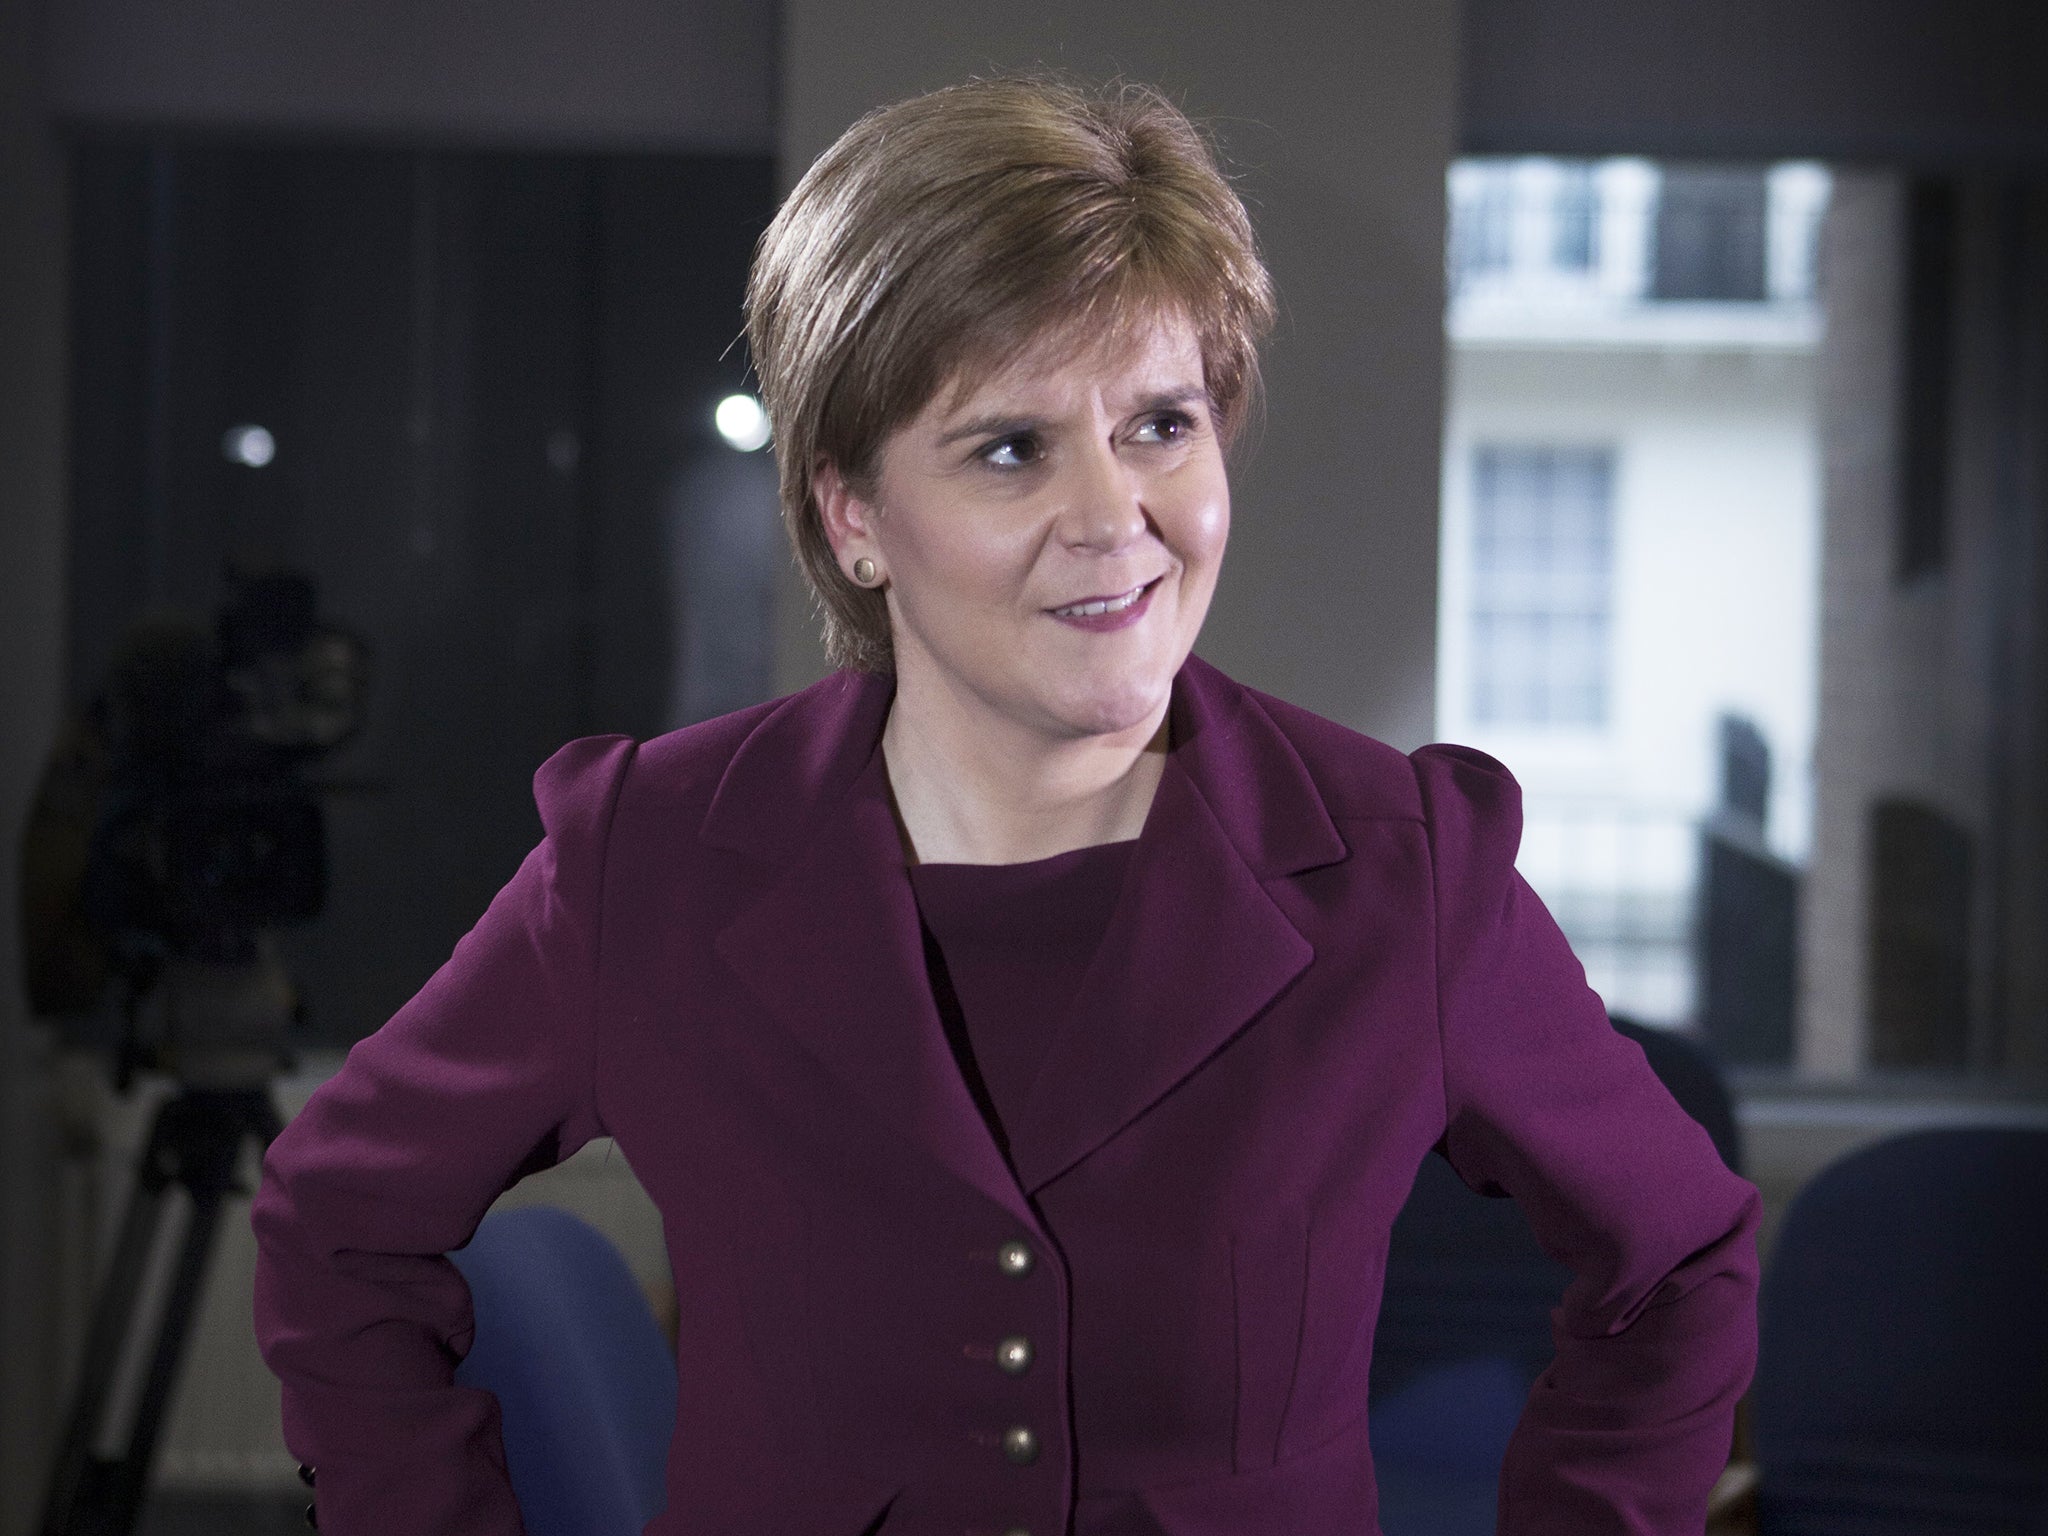 The Scottish first minister was quick to condemn her MP